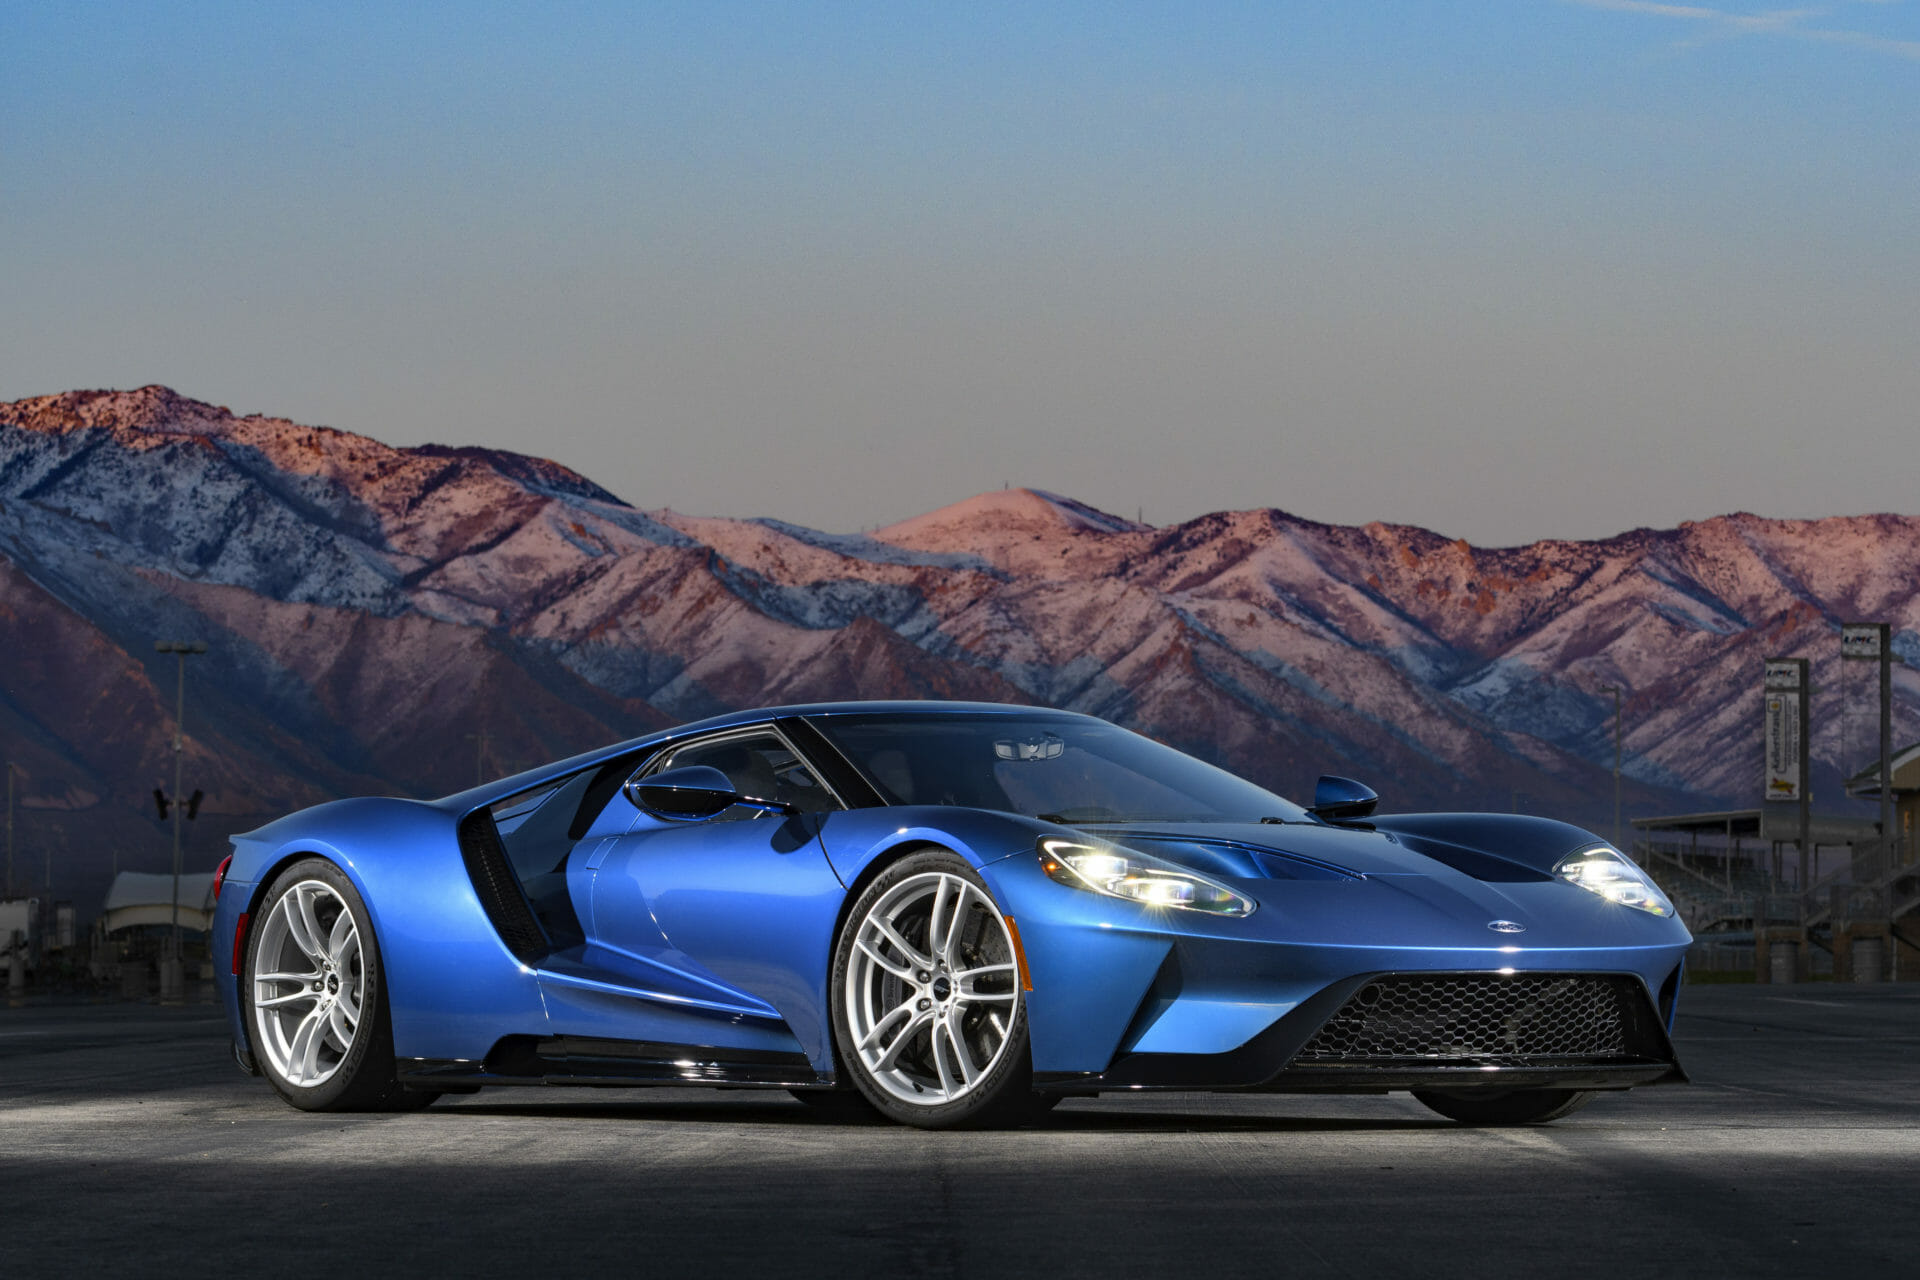 Ford GT Engine: What is the Best Engine for the GT?